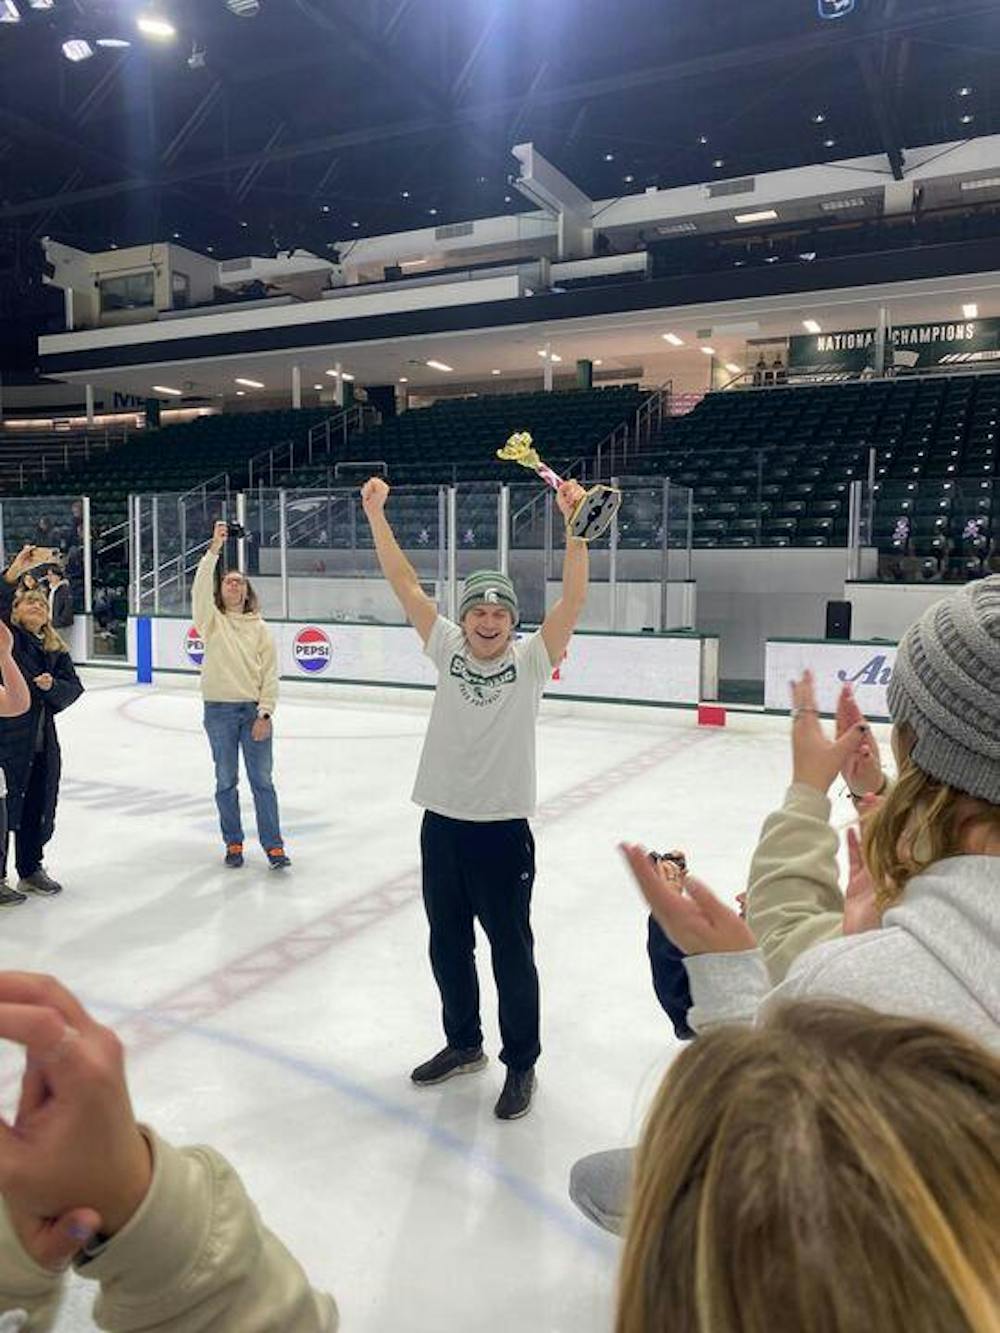 <p>The State News gathered for a chaotic game of broomball against the friendly foe Impact 89FM at Munn Ice Arena on Dec. 2, 2023. This game of broomball involved absolutely no organization, coordination or harmony across the team. Despite this, for the first time in several years, The State News came away with a triumphant win with a score of 5-1. Campus reporter Owen McCarthy and sports reporter Jacob Smith were unofficially named MVPs after unmatched efforts in both defensive and offensive plays. Blood was shed, chants were roared and bellowing laughs were heard across the ice in the monumental game.</p>